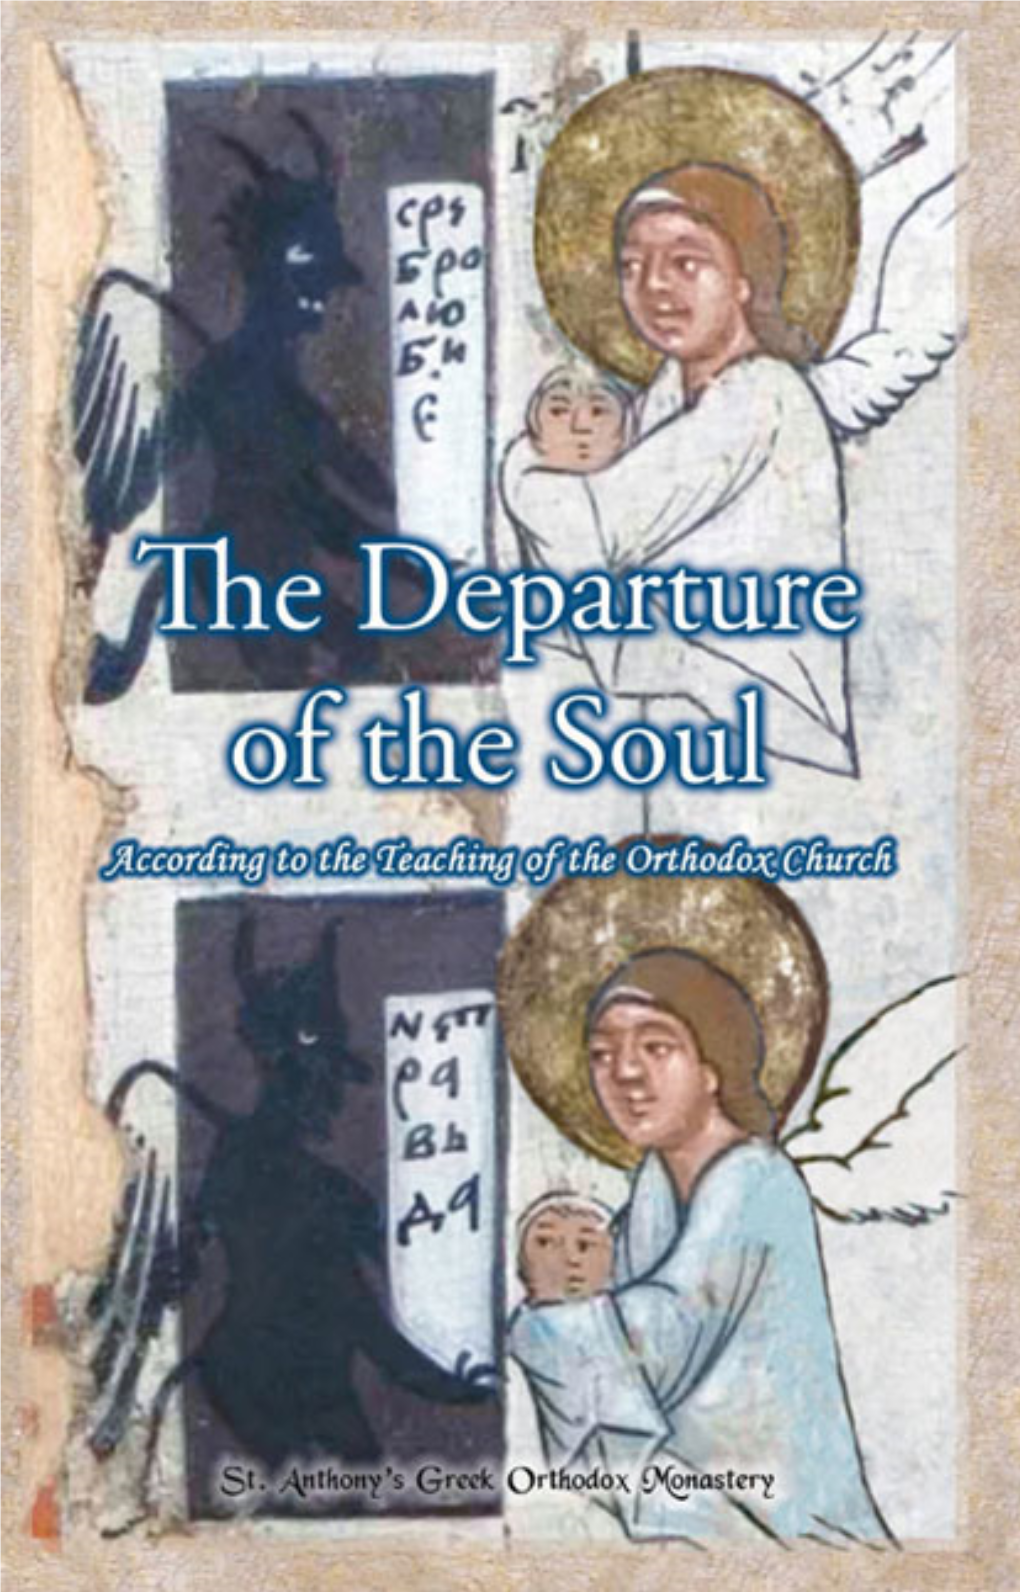 The Canon for the Departure of the Soul